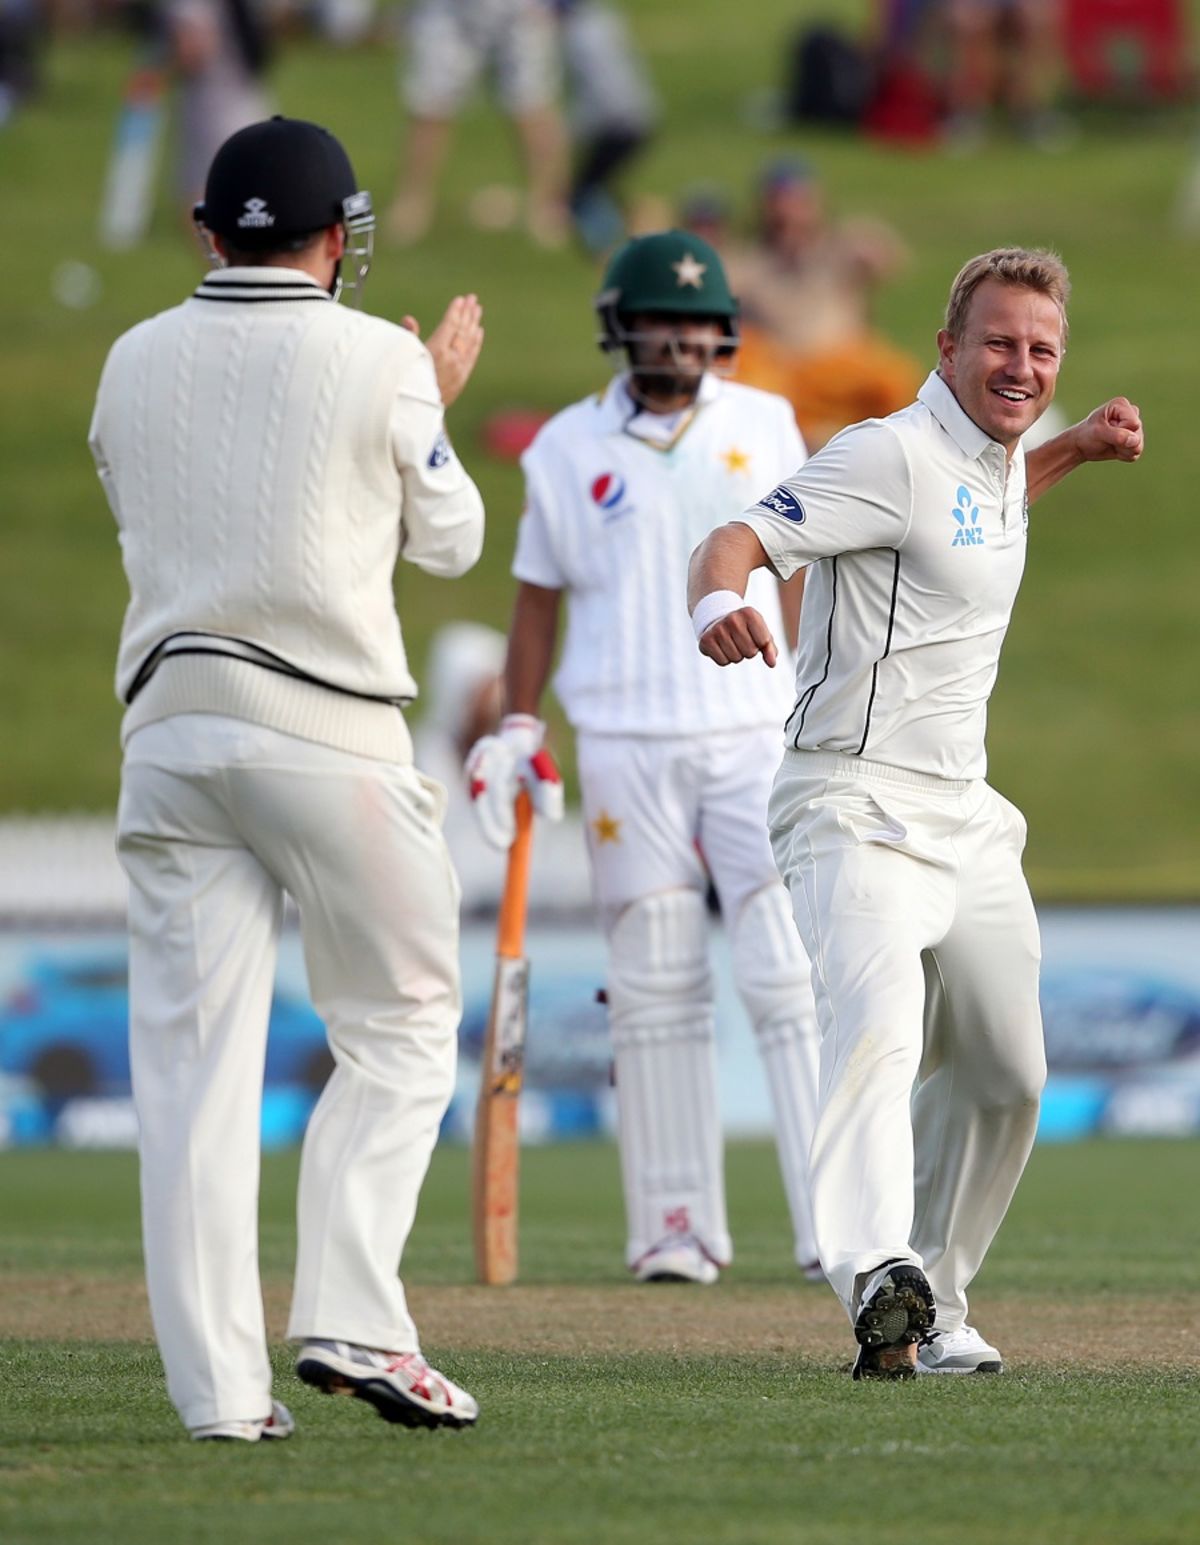 Neil Wagner celebrating after taking a wicket of Rizwan